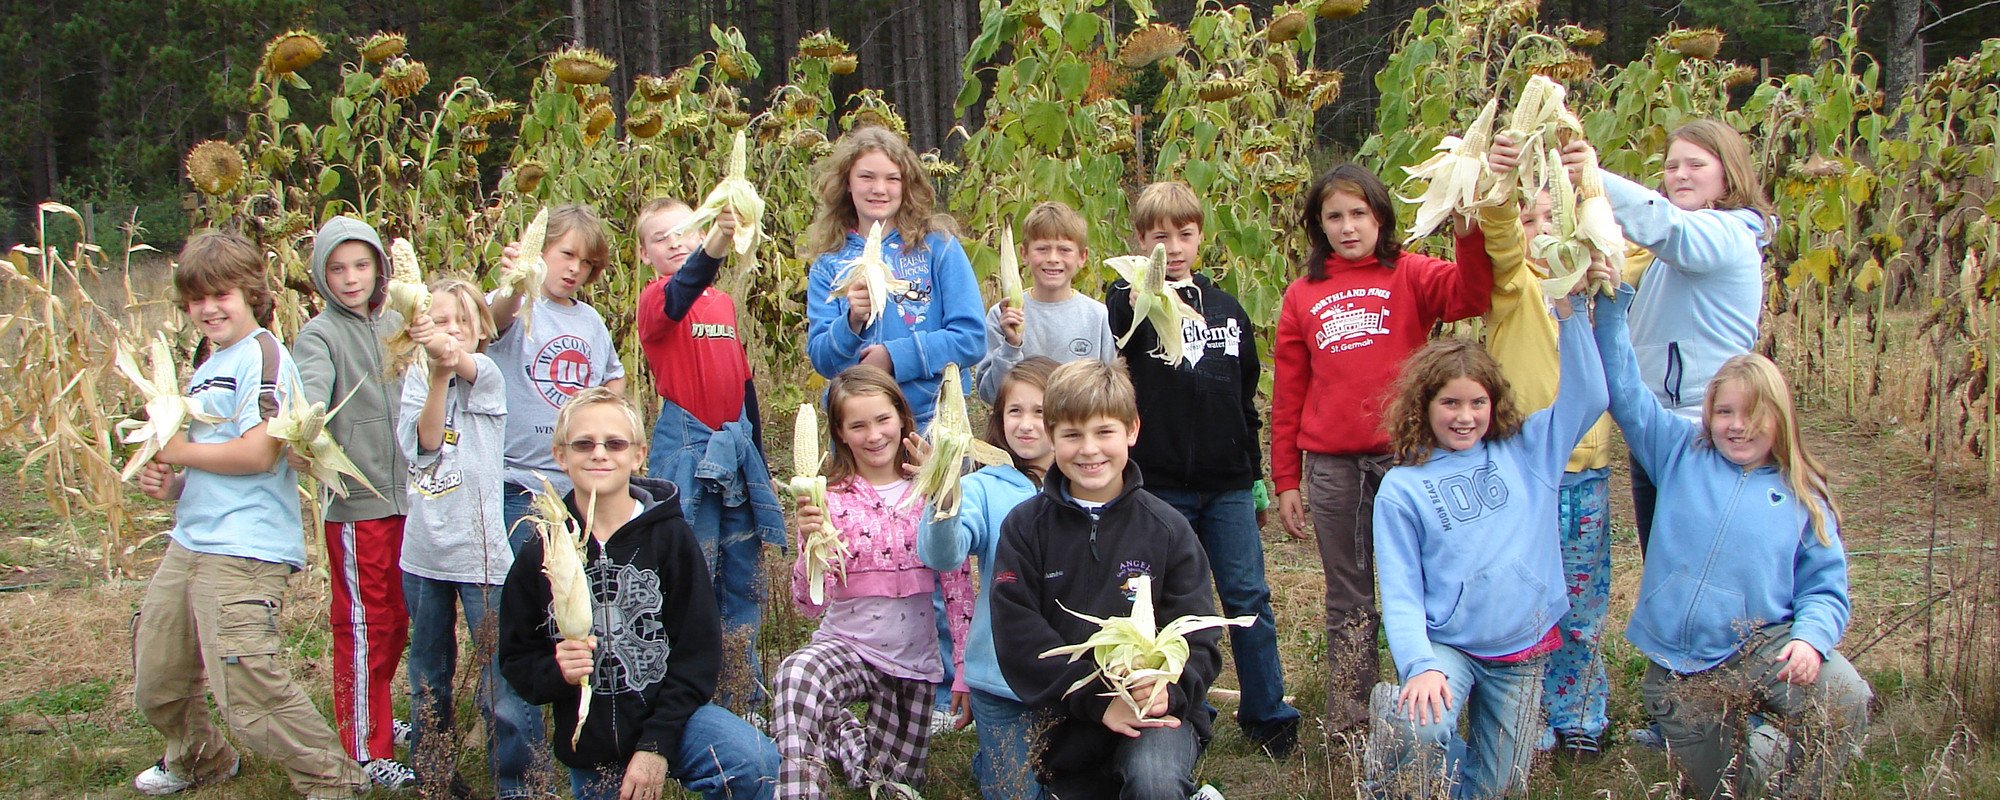 STG - Old Photo of Students with Corn